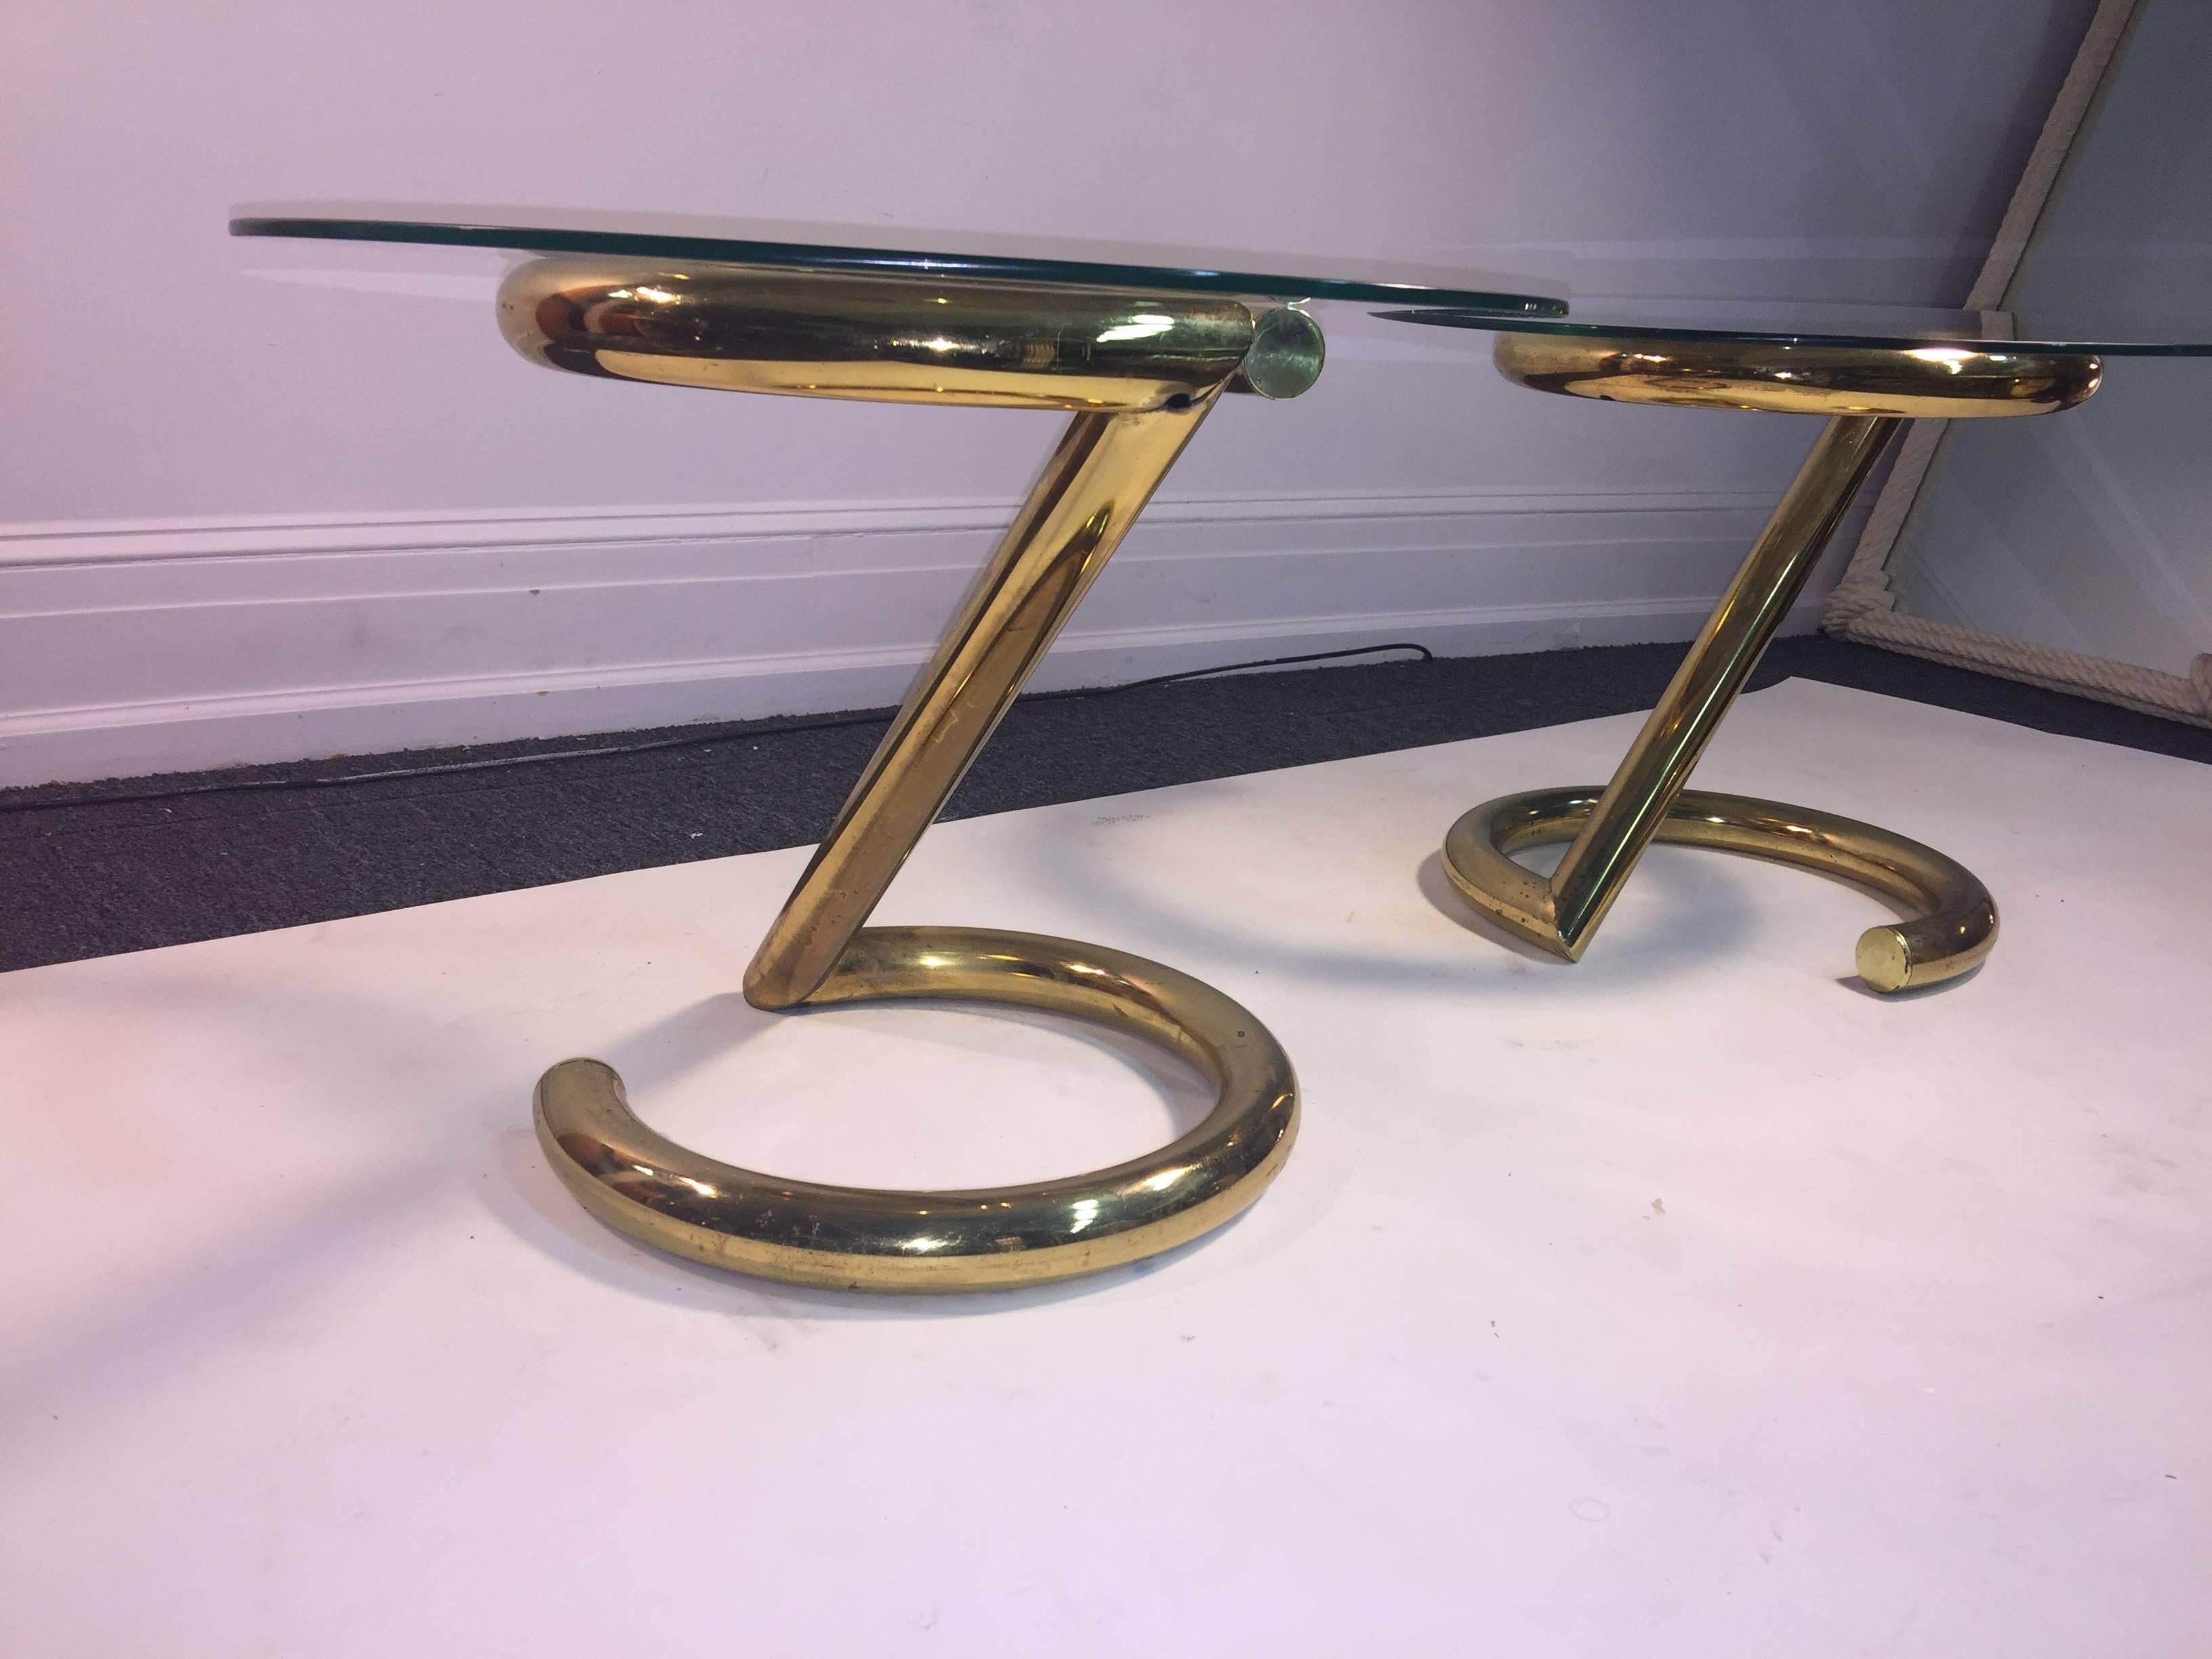 Modernist Zig Zag Tables In Tubular Goldtone Metal In Good Condition For Sale In Allentown, PA